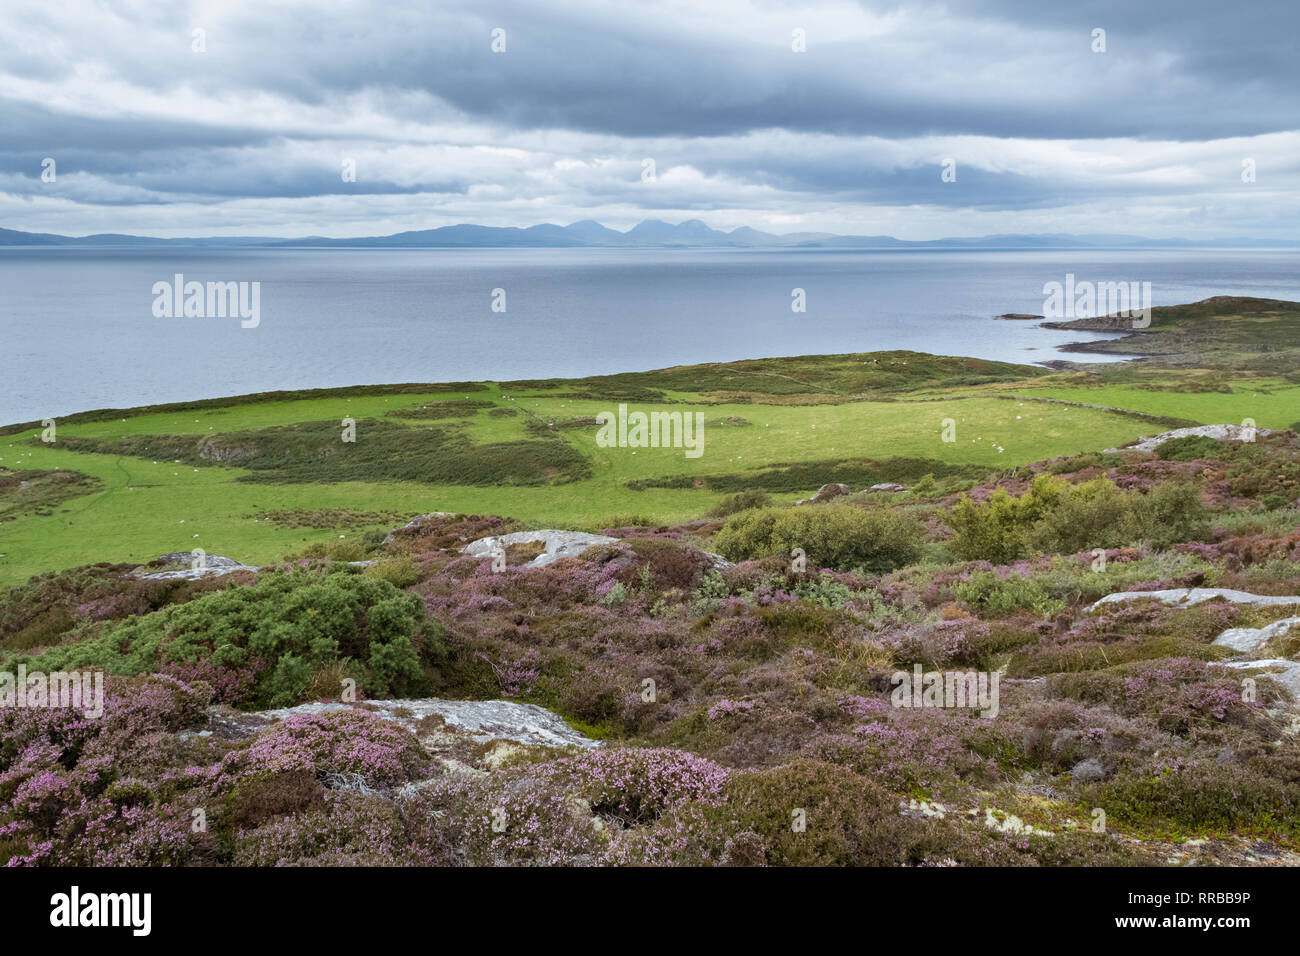 Isle of Gigha, Argyll and Bute, Scotland, UK - with the Paps of Jura visible on the horizon Stock Photo